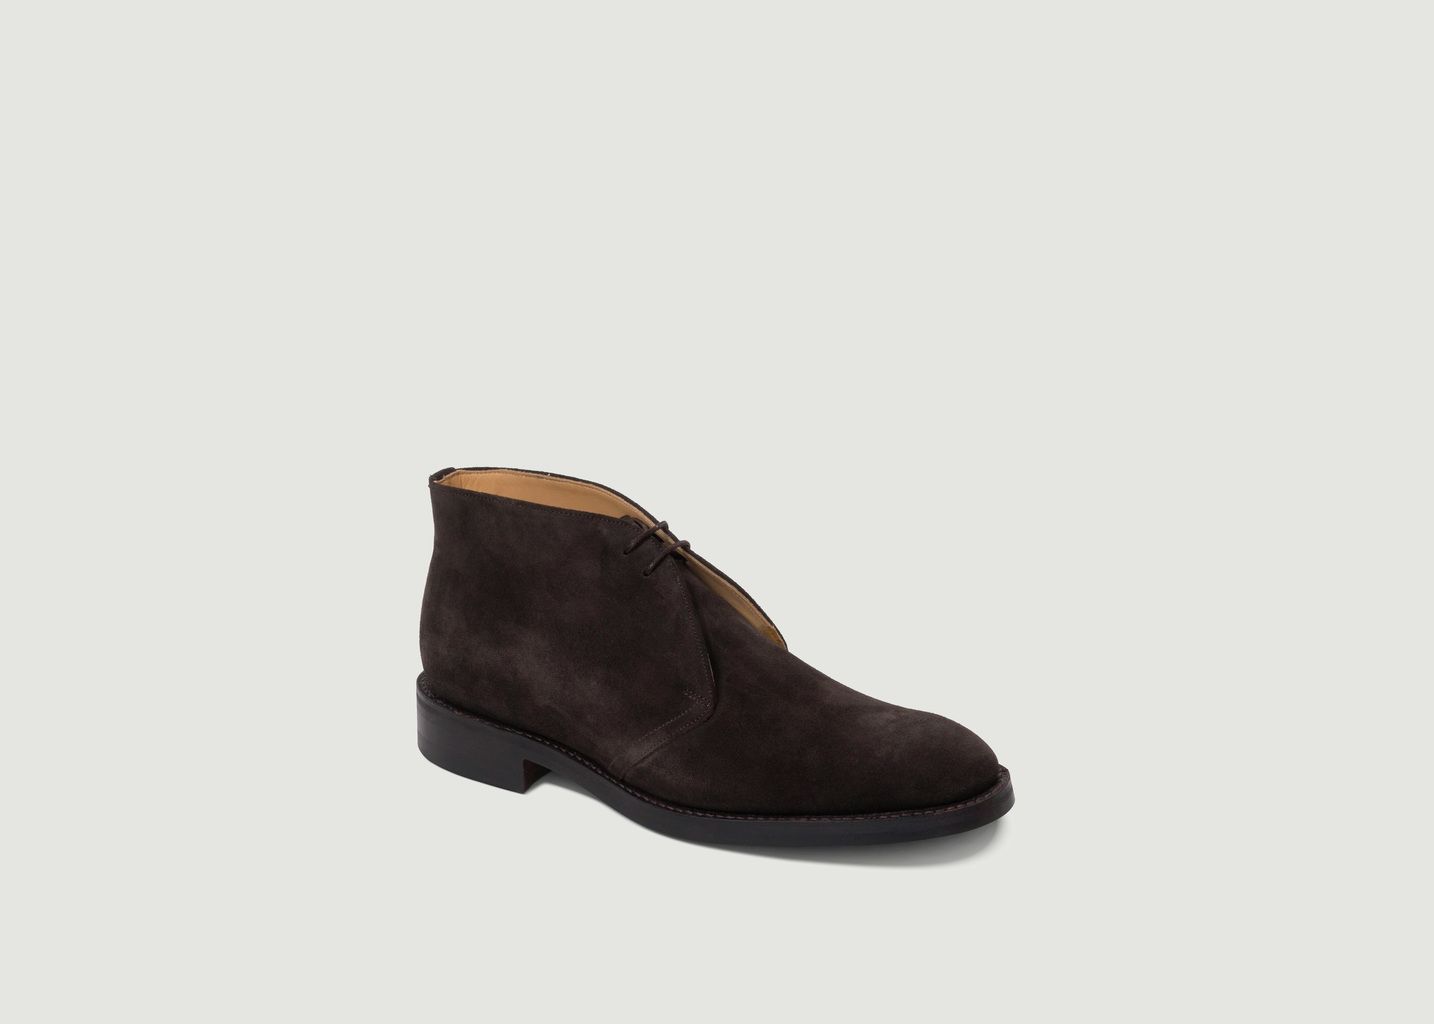 Sandwell Boots - Barker Shoes